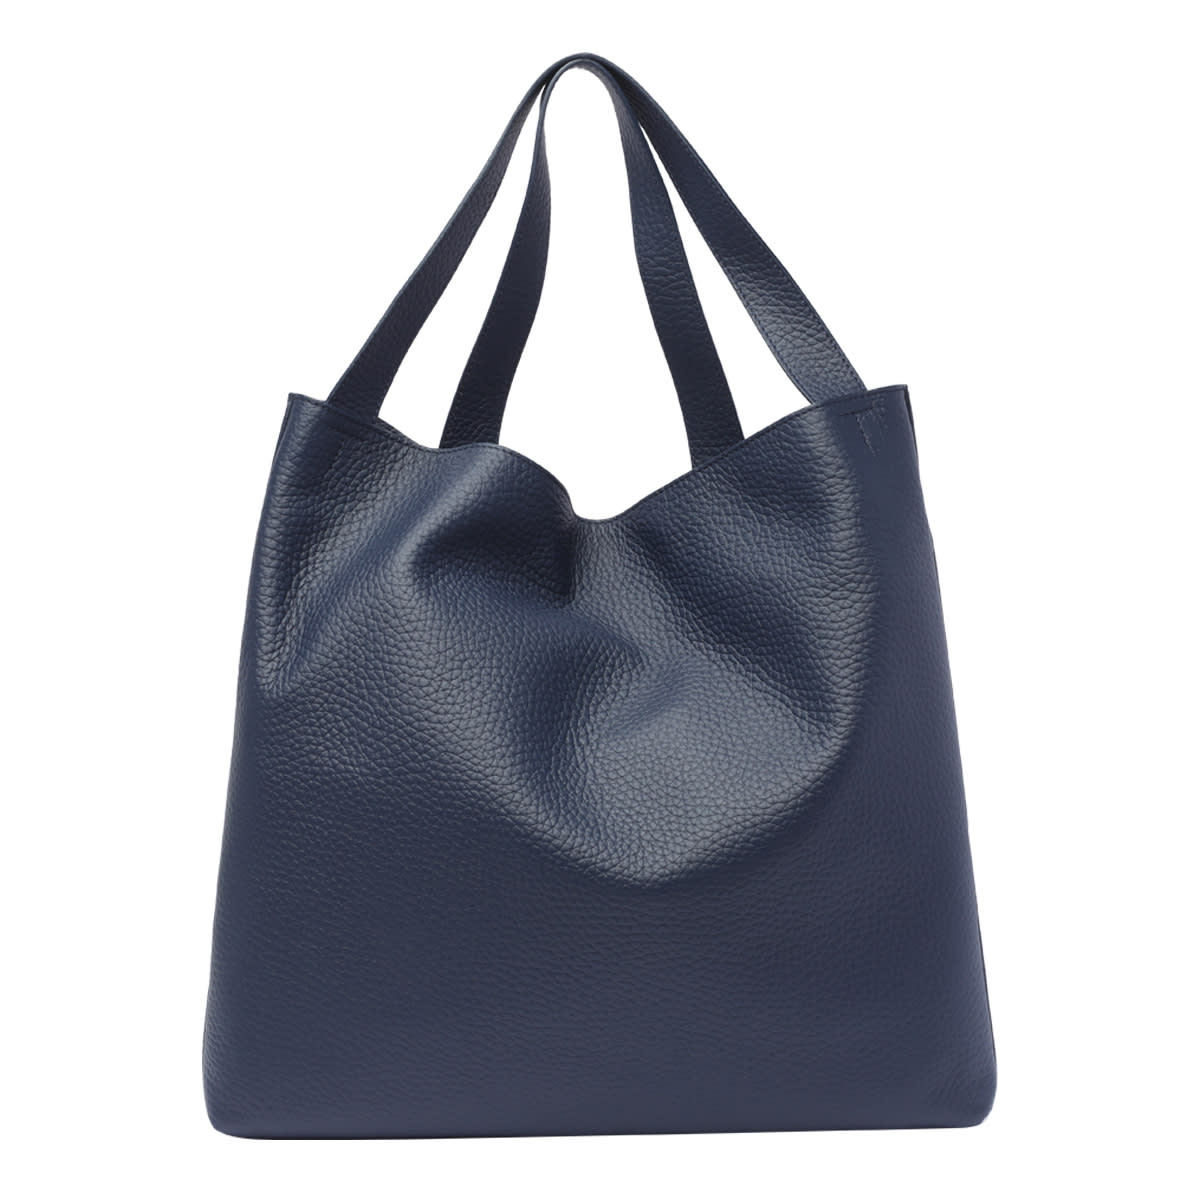 Shop Orciani Soft Leather Bag In Blue